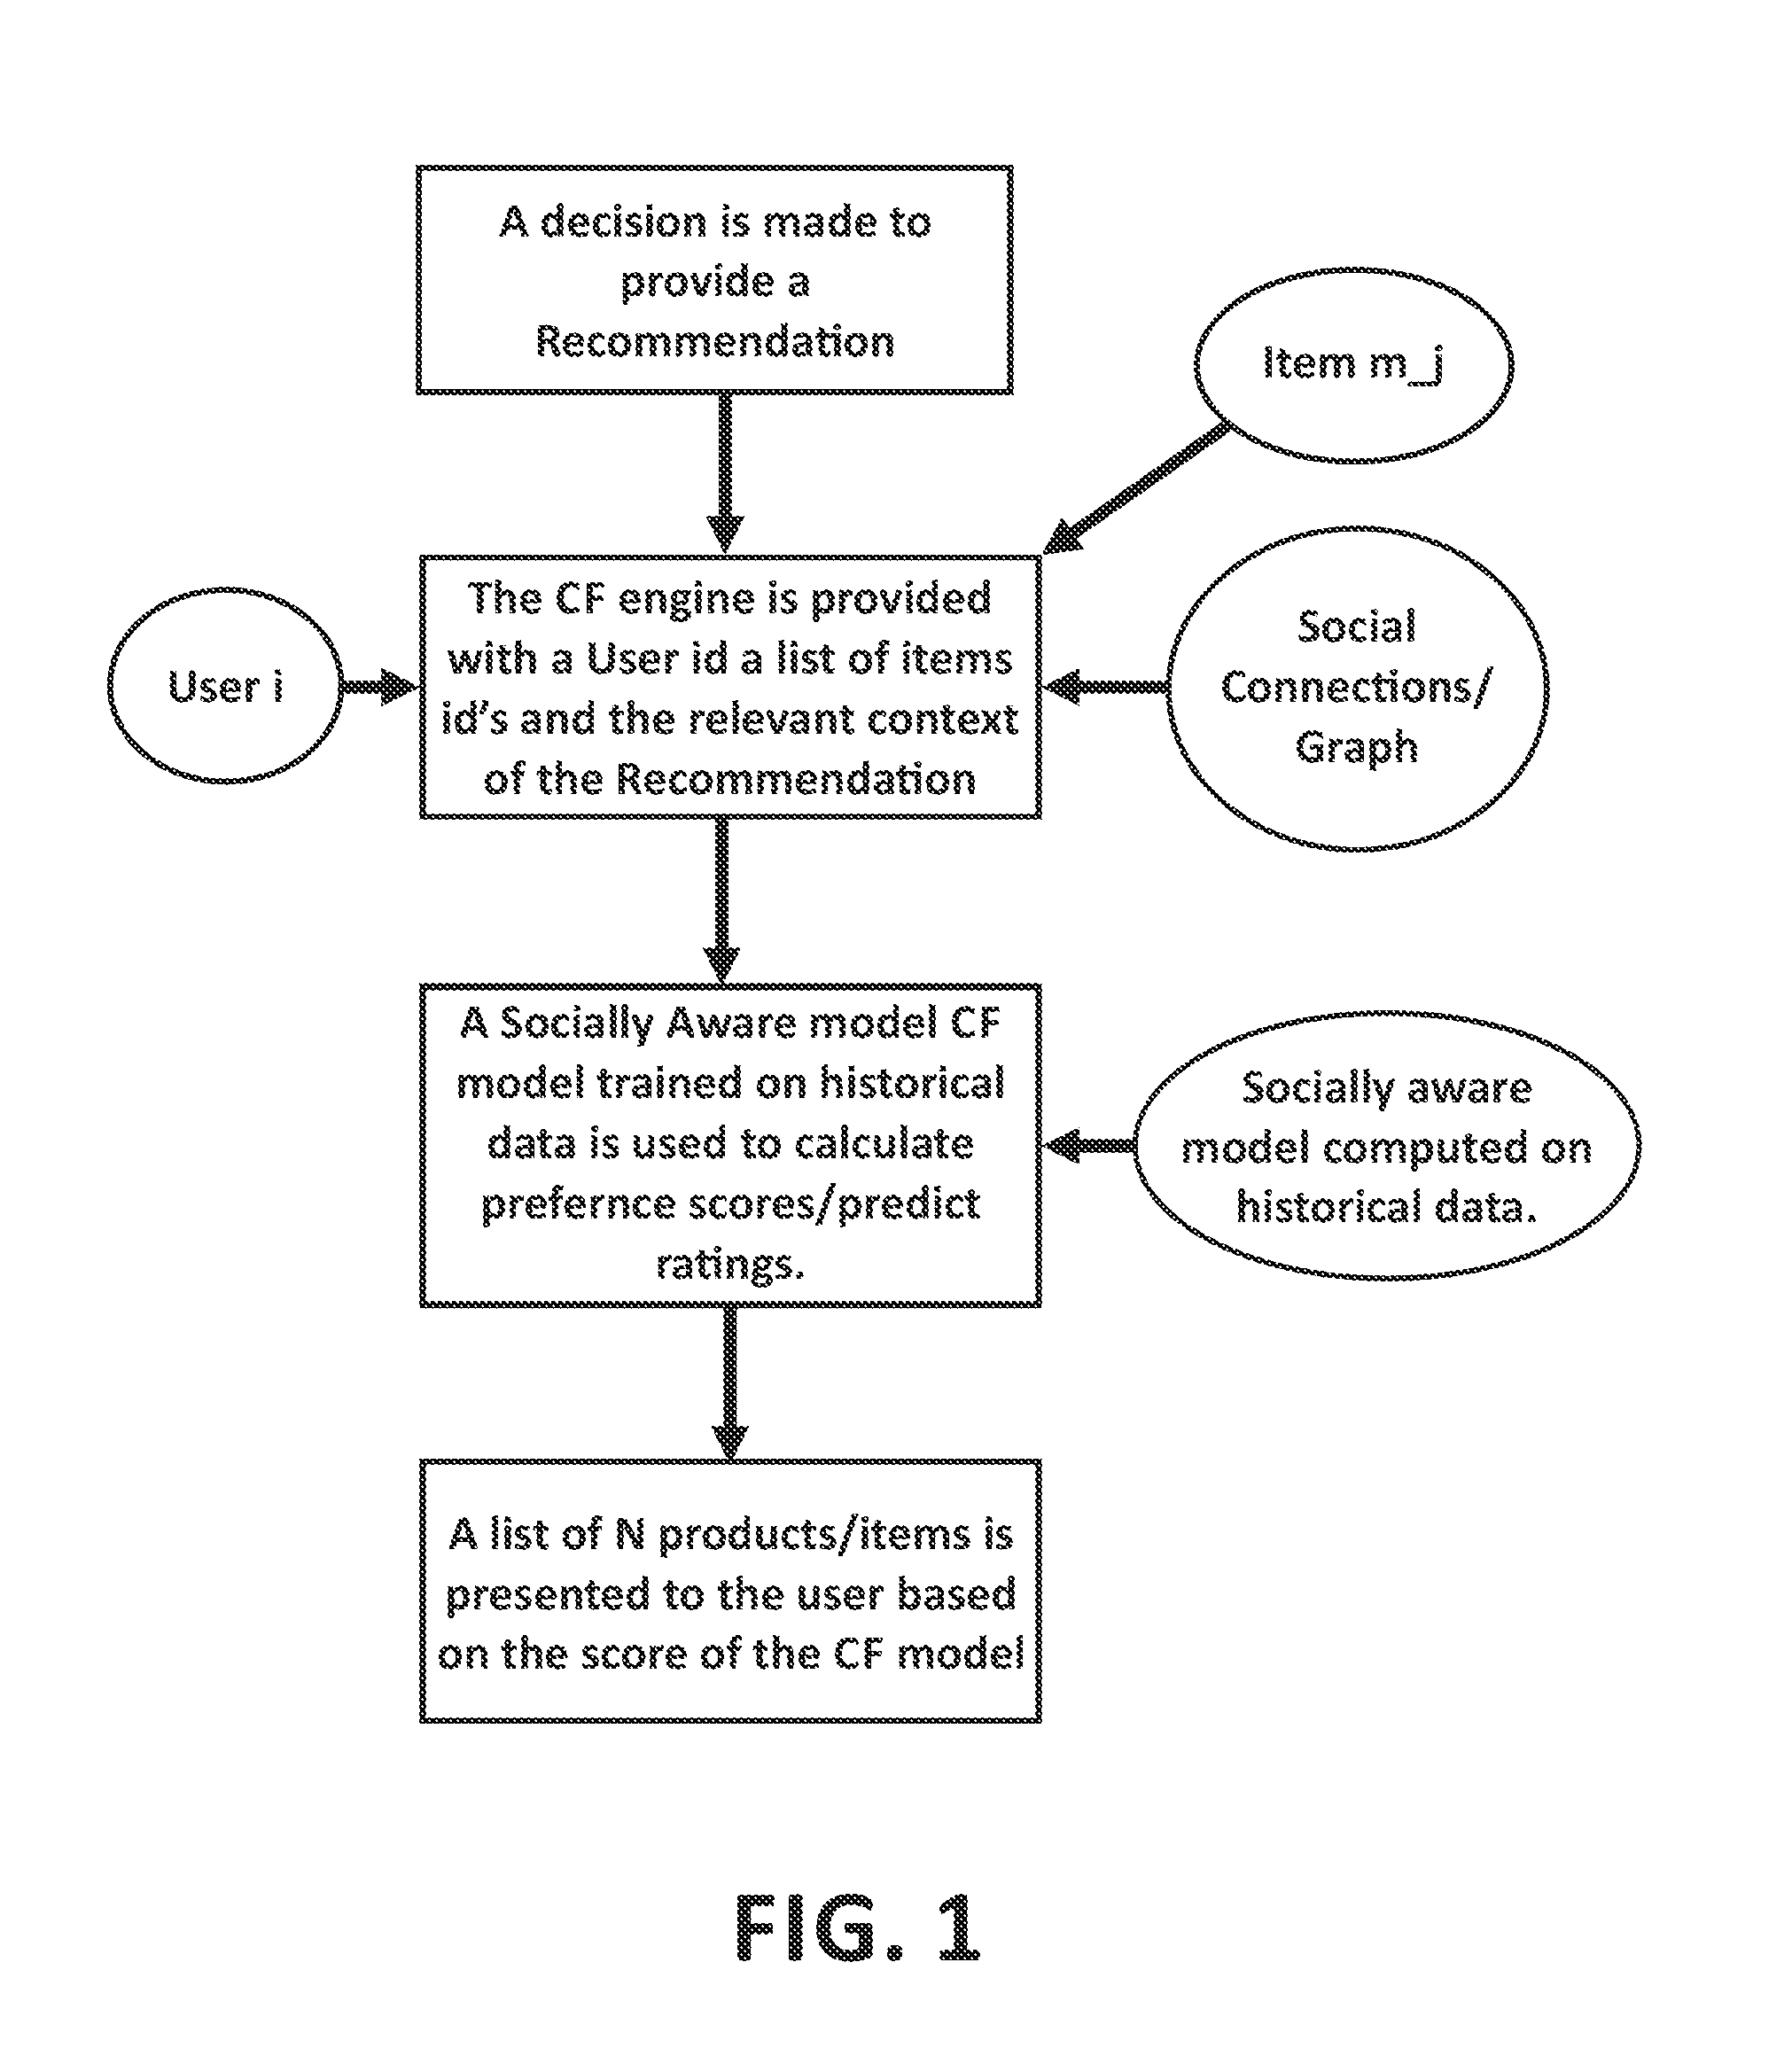 System and Method for Socially Aware Recommendations Based on Implicit User Feedback